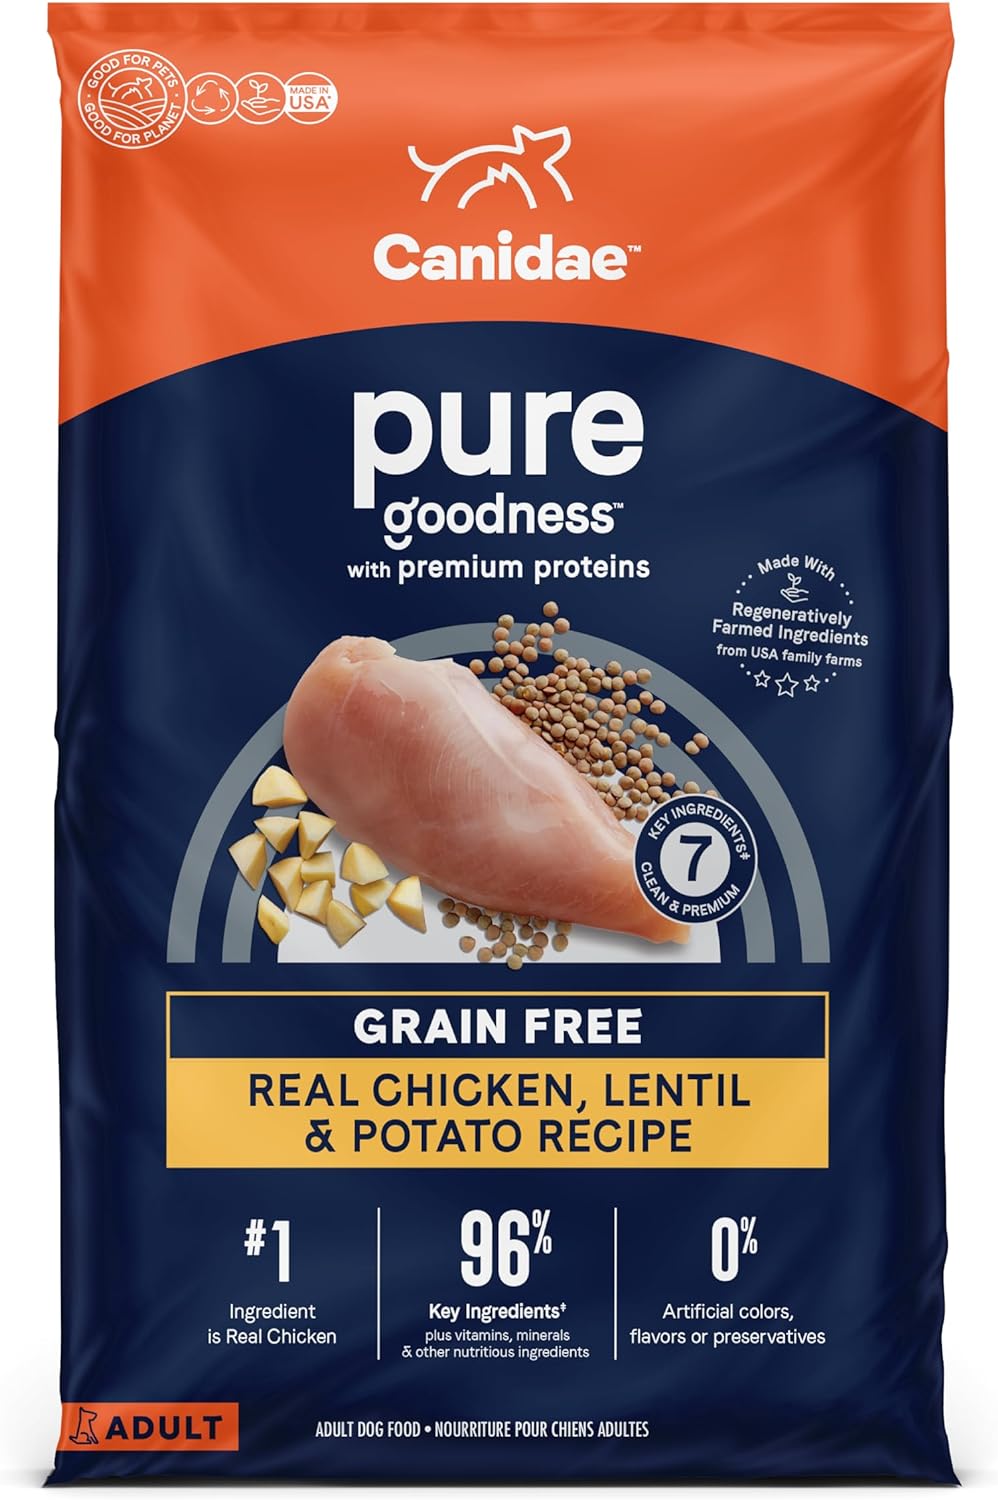 Canidae Pure Limited Ingredient Premium Adult Dry Dog Food, Real Chicken, Lentil & Potato Recipe, 4 lbs, Grain Free